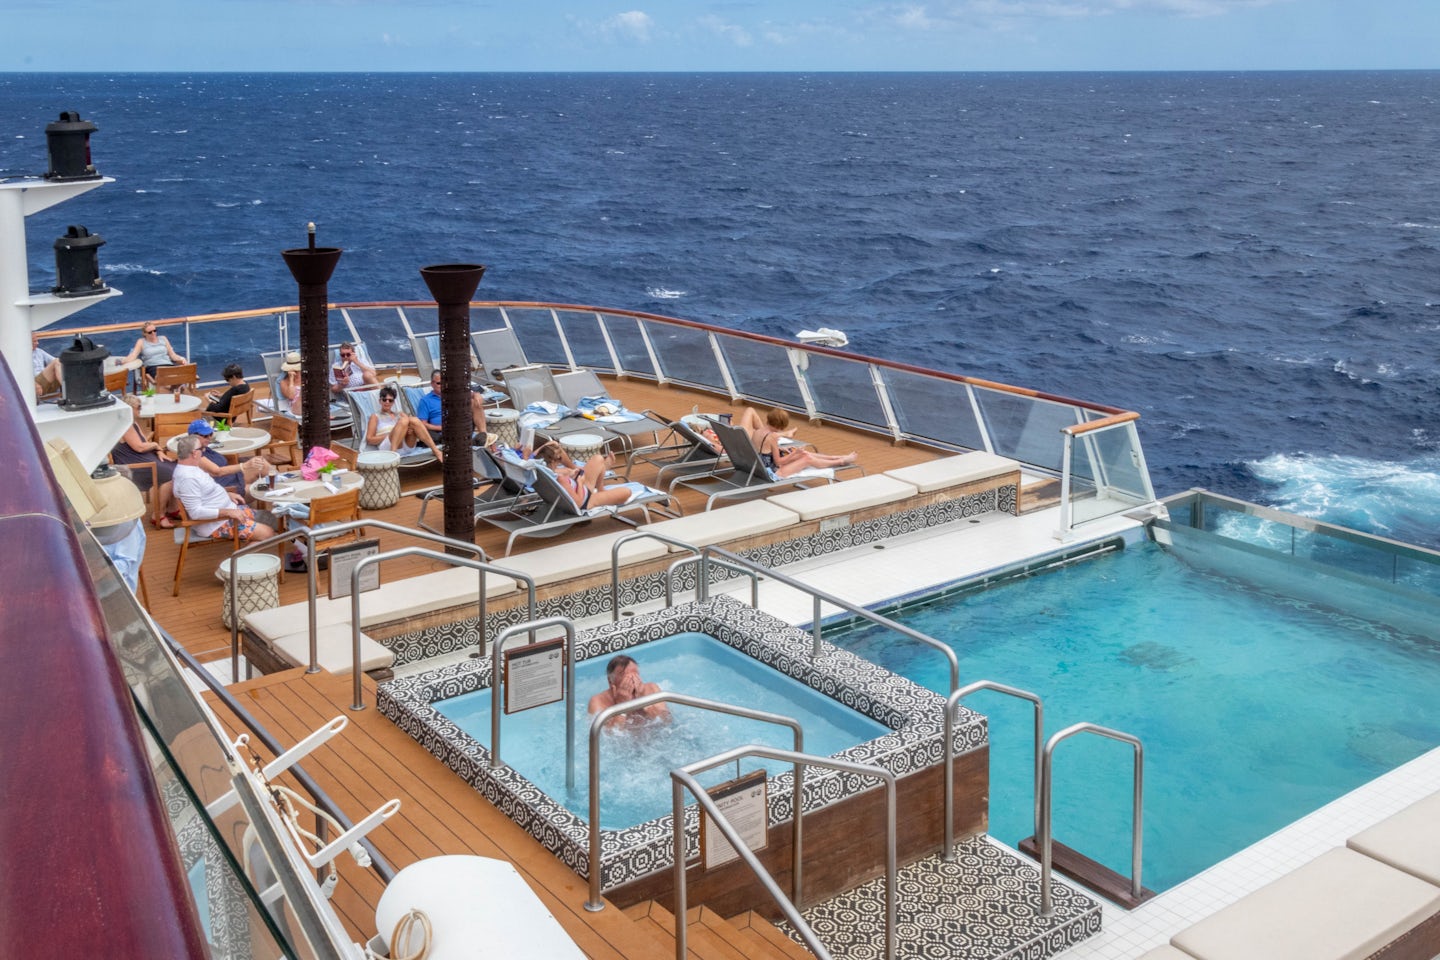 Lunch on the aft deck. Note the infinity pool and hot tub.